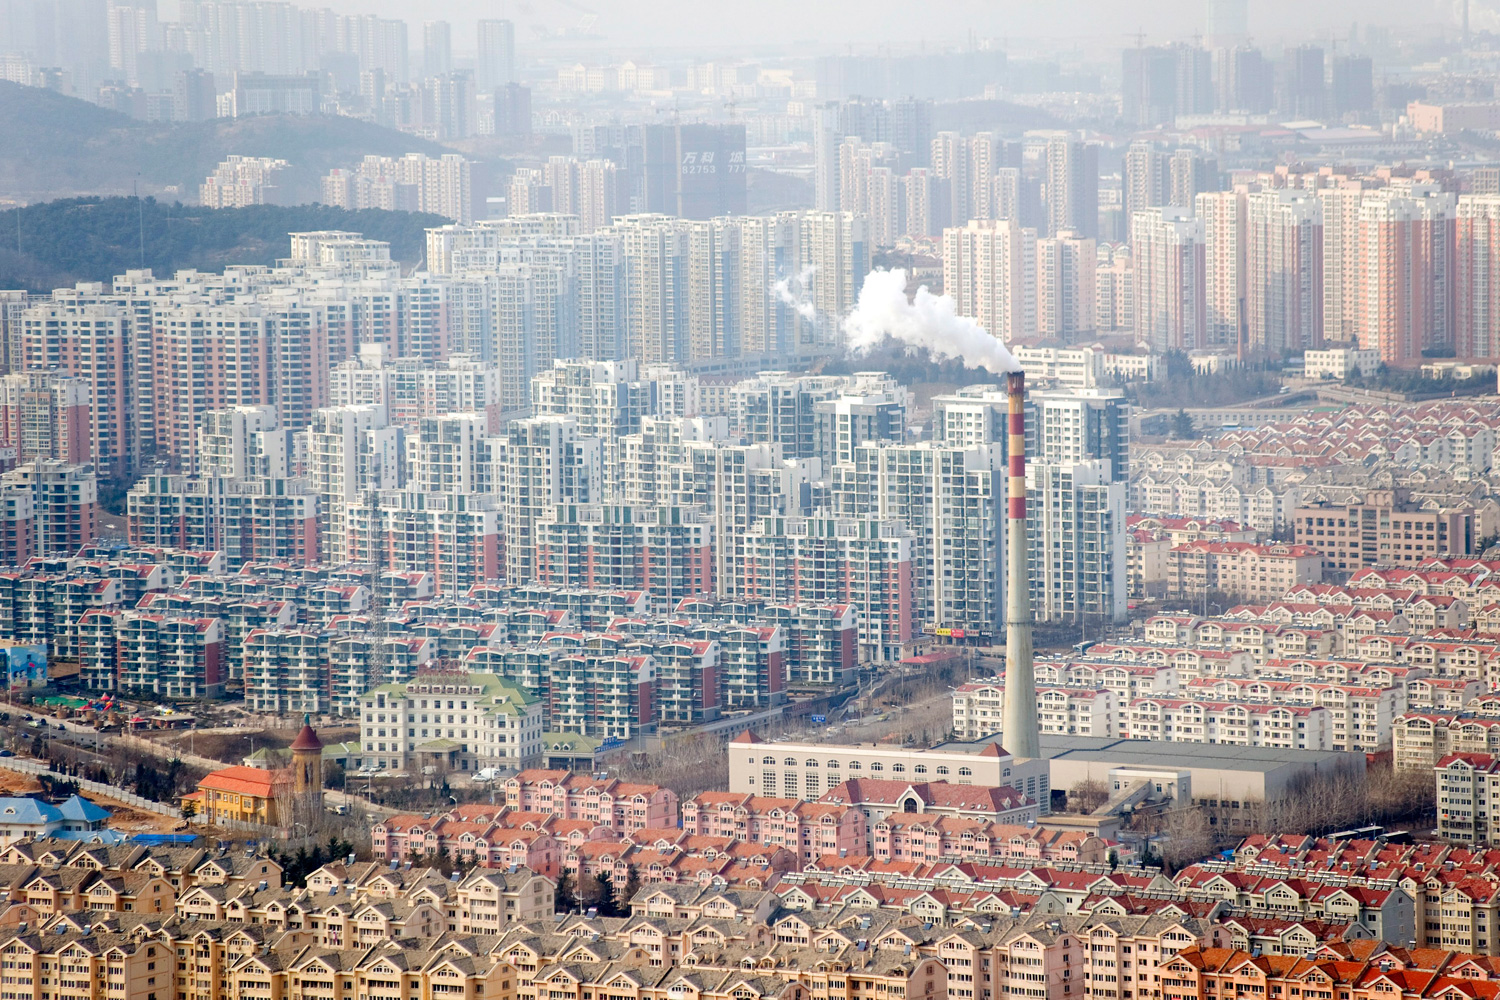 March 2, 2012. A general view shows many residential buildings in downtown Qingdao city in eastern China's Shandong province.